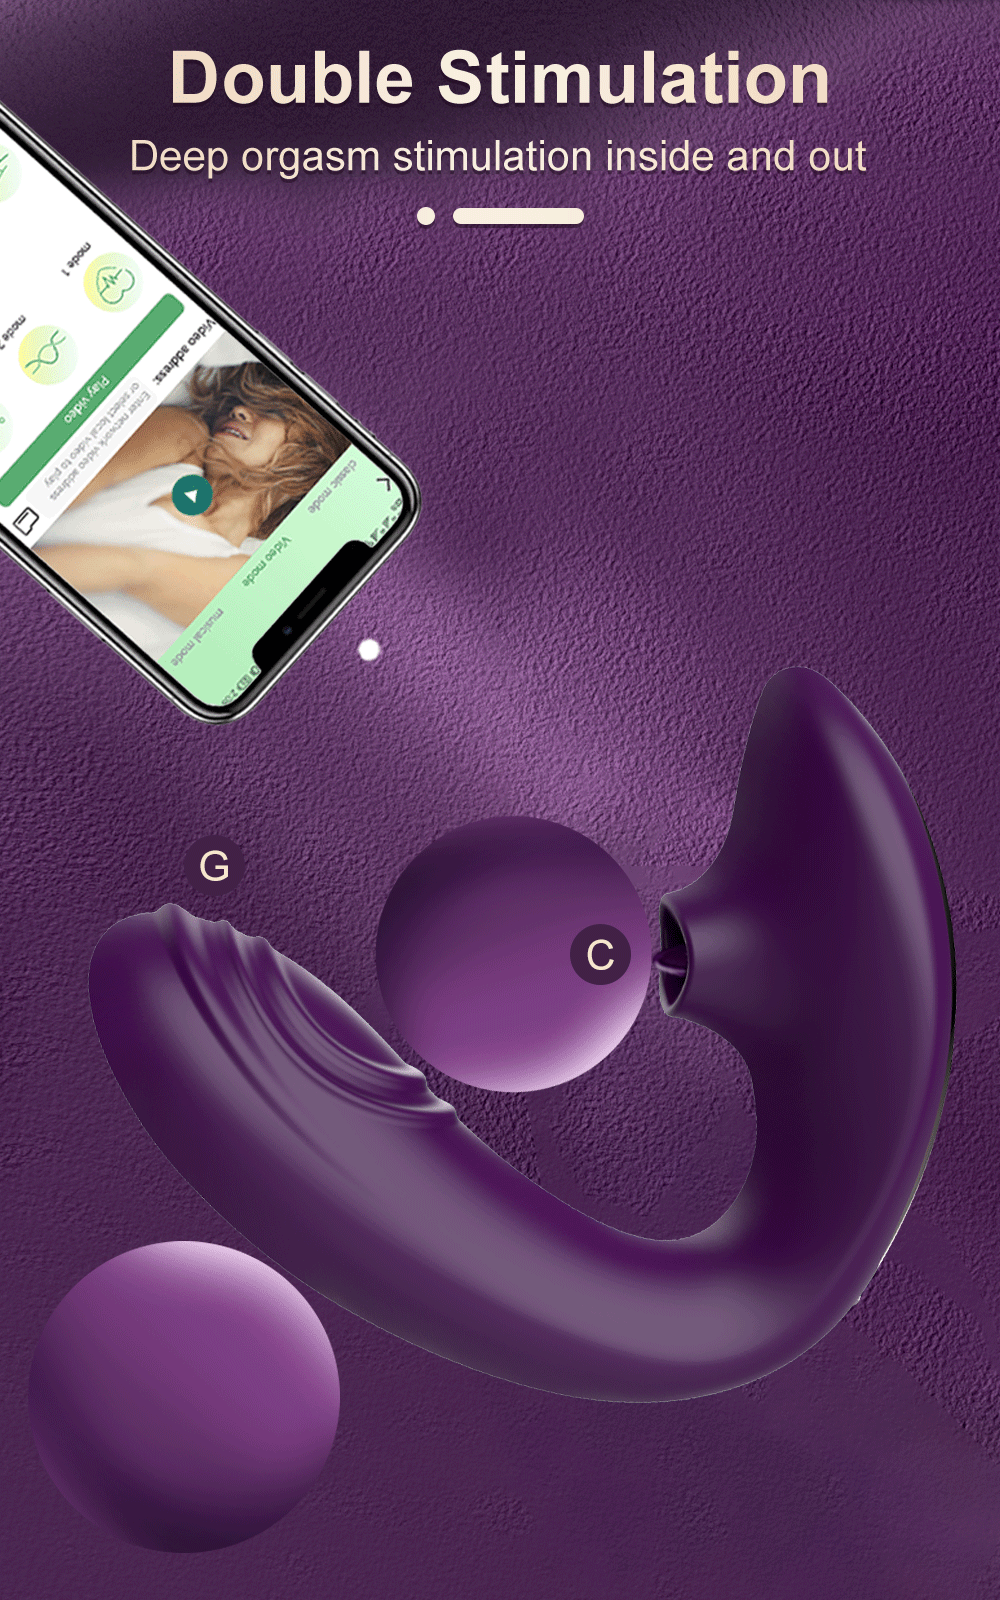 Powerful Bluetooth APP Vibrator Female with Tongue Licking Clitoris Stimulator G Spot Massager Adult Goods Sex Toys for Women S4213ae5391a145bd97d64b7a374c5b1a9